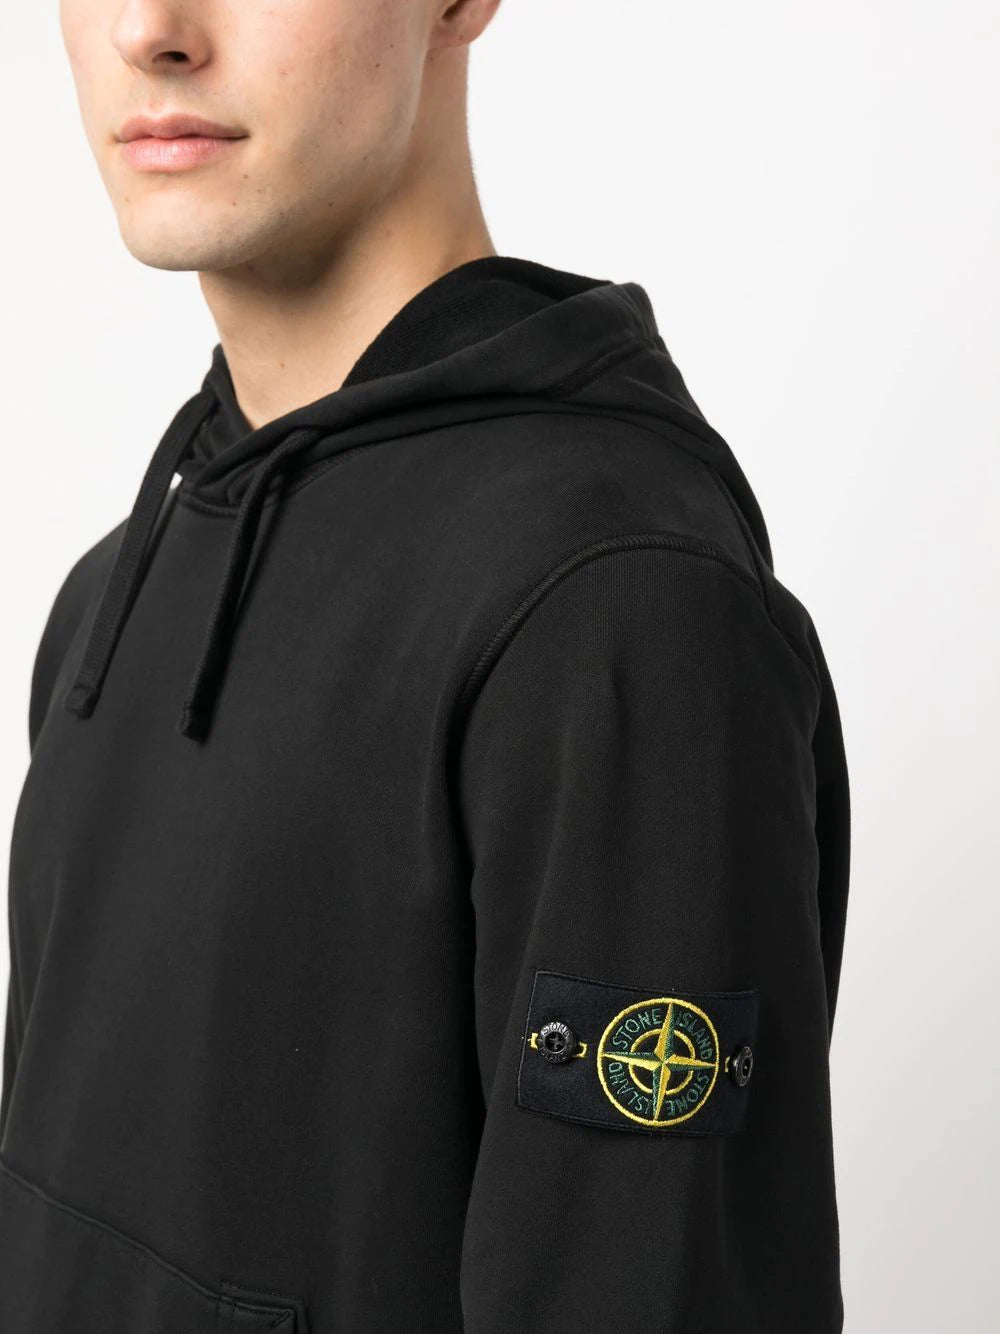 Stone Island Compass Patch Drawstring Hoodie in Black